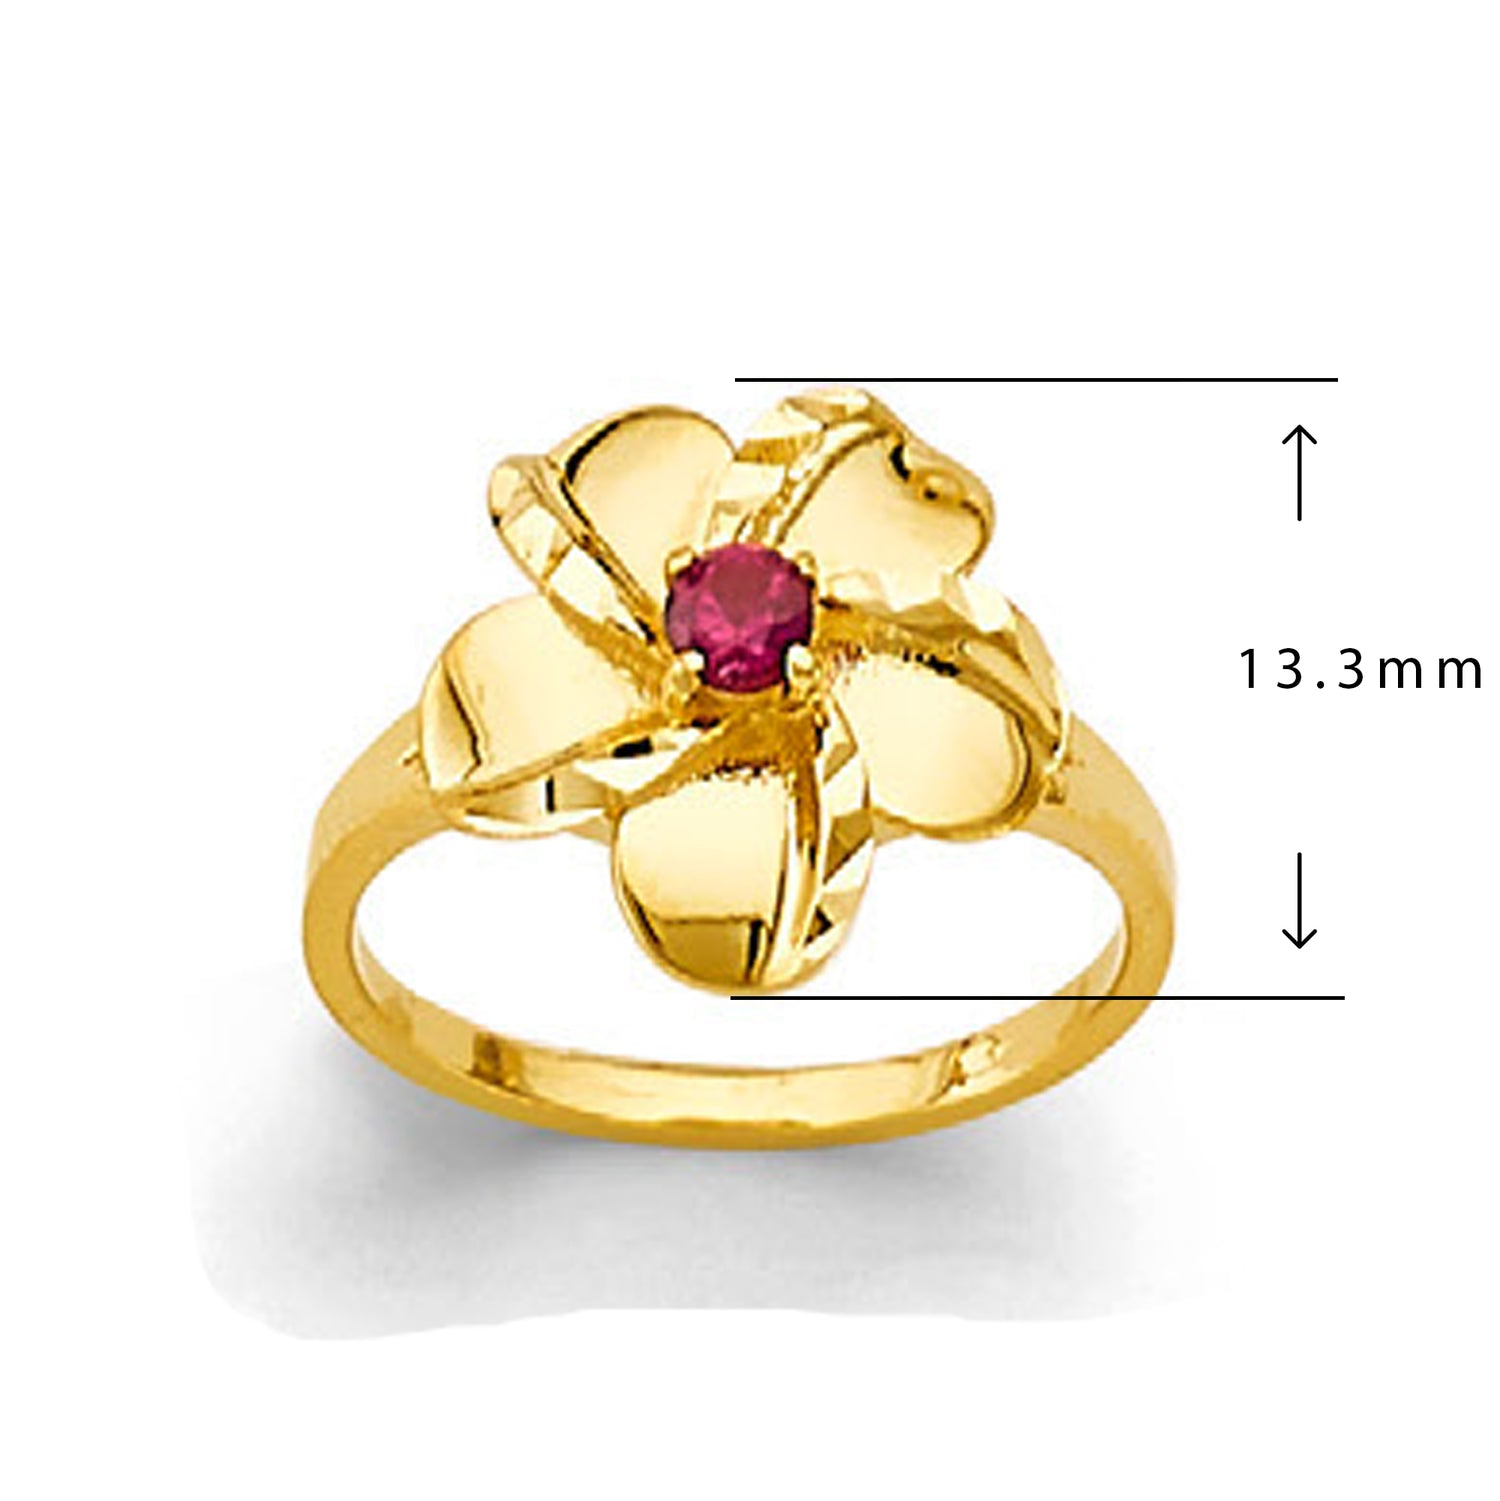 Ruby-studded Five Petals Flower Ring in Solid Gold with Measurement